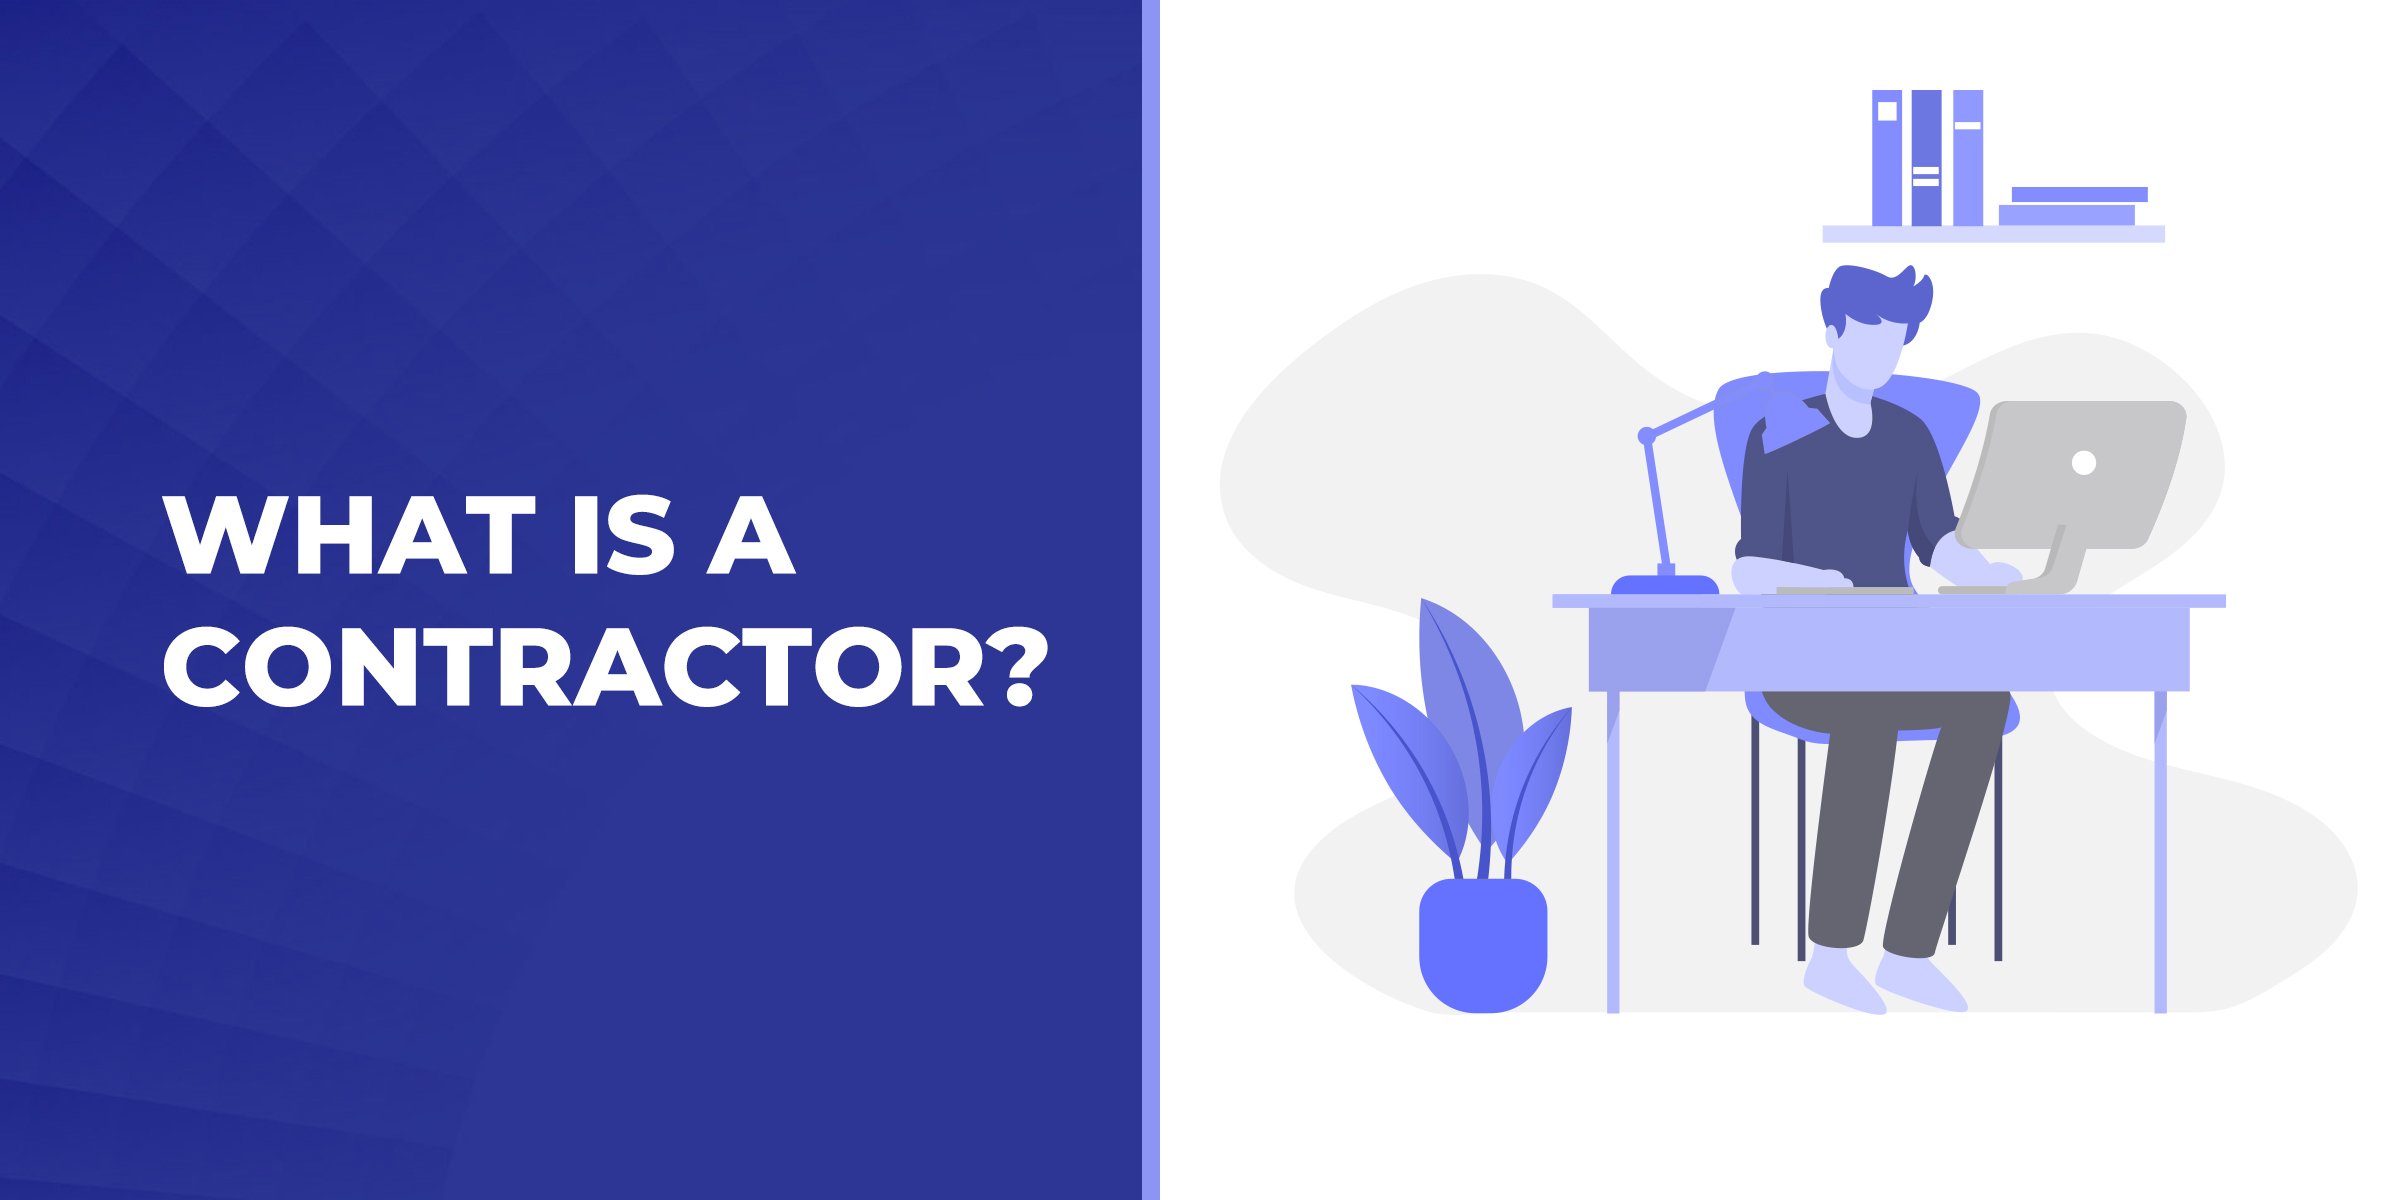 What is a Contractor?